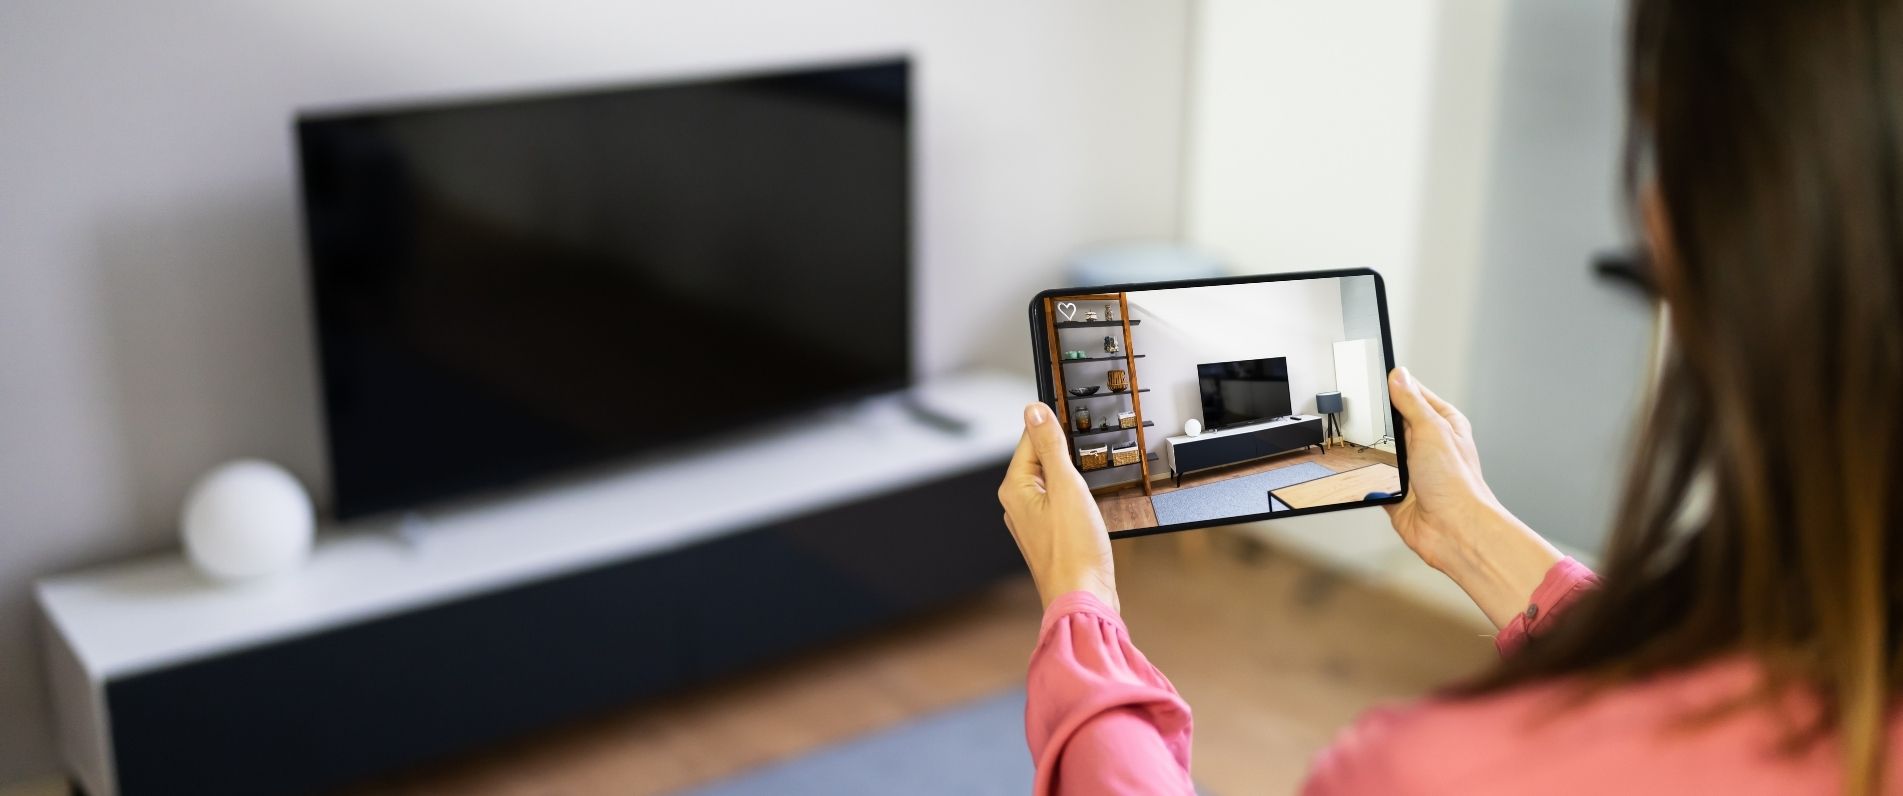 3 Reasons Real Estate Agents Should Use Virtual Tour Software